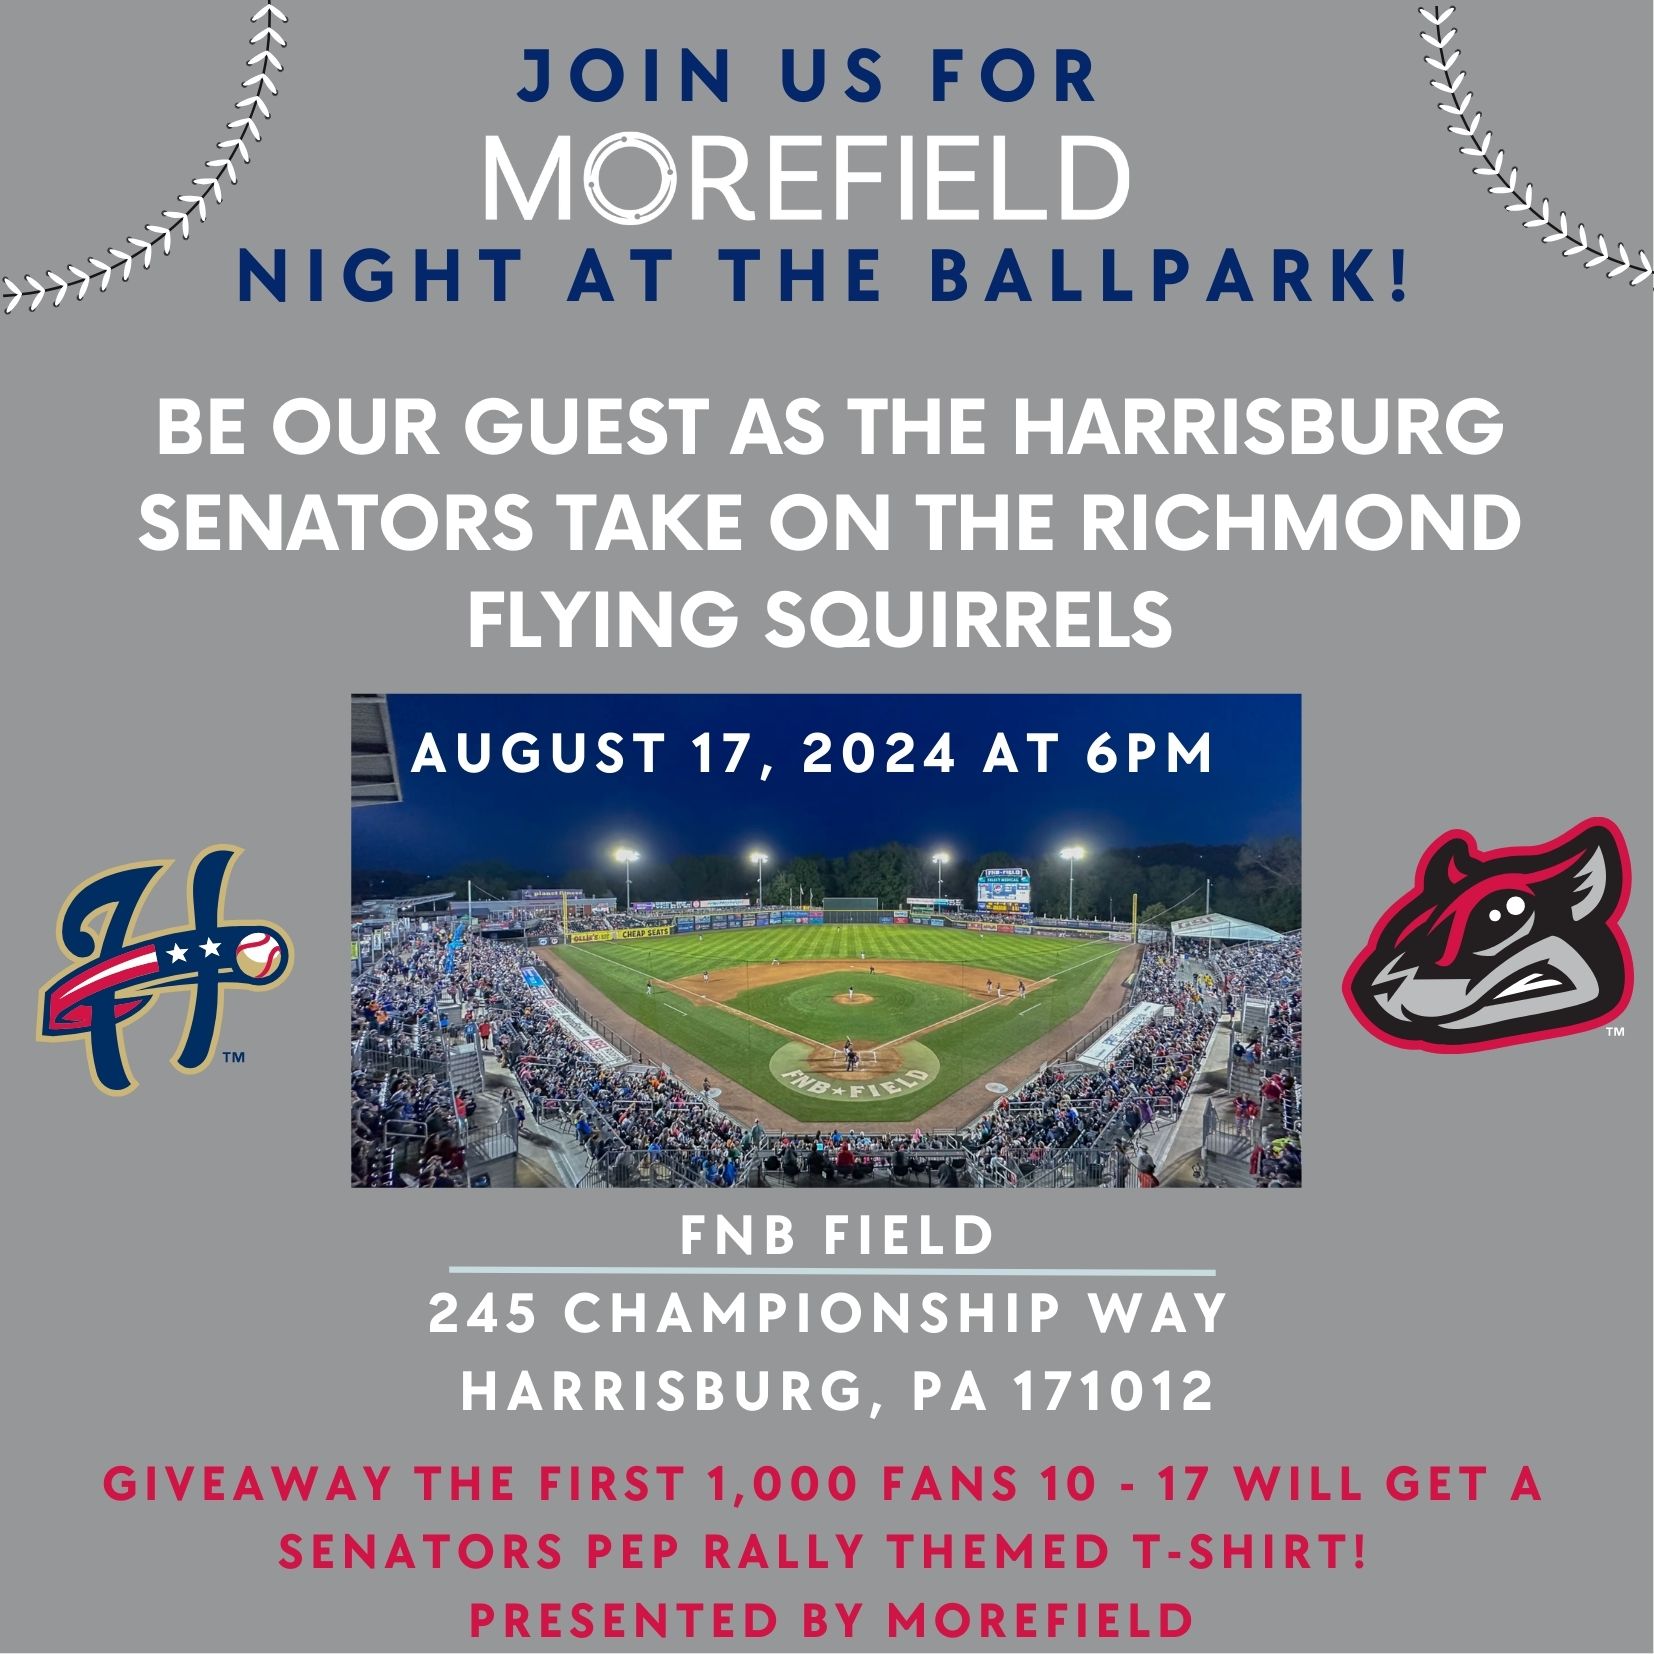 Join us for Morefield Night at the ballpark!(1)